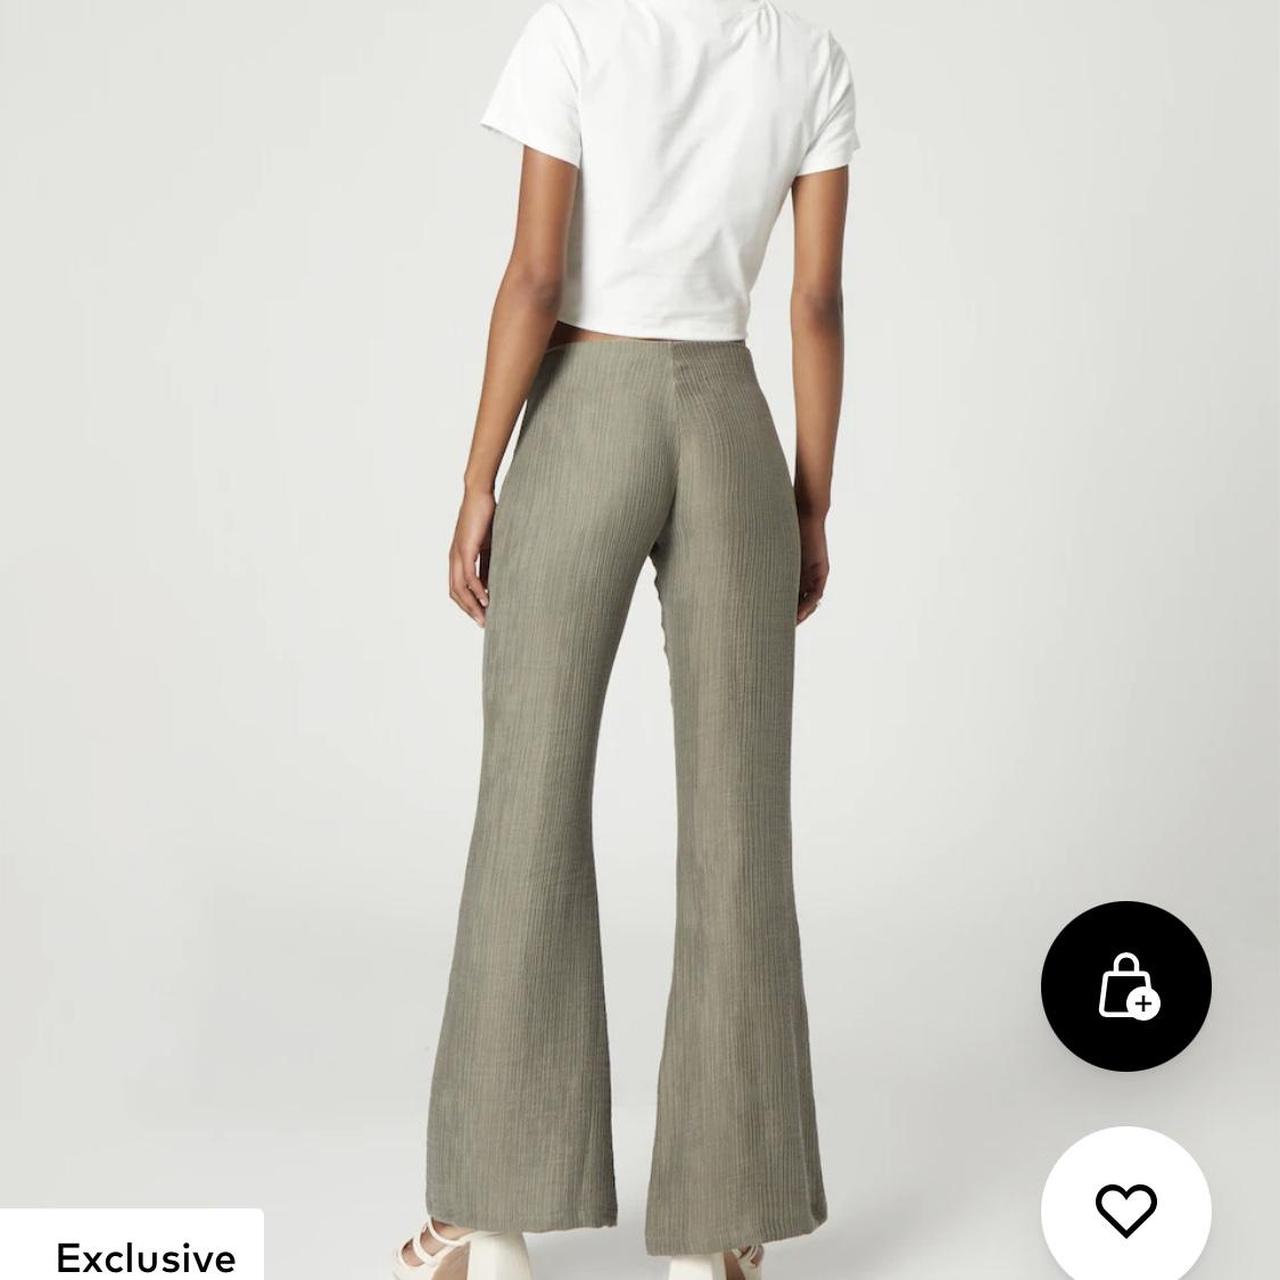 About You Women's Trousers